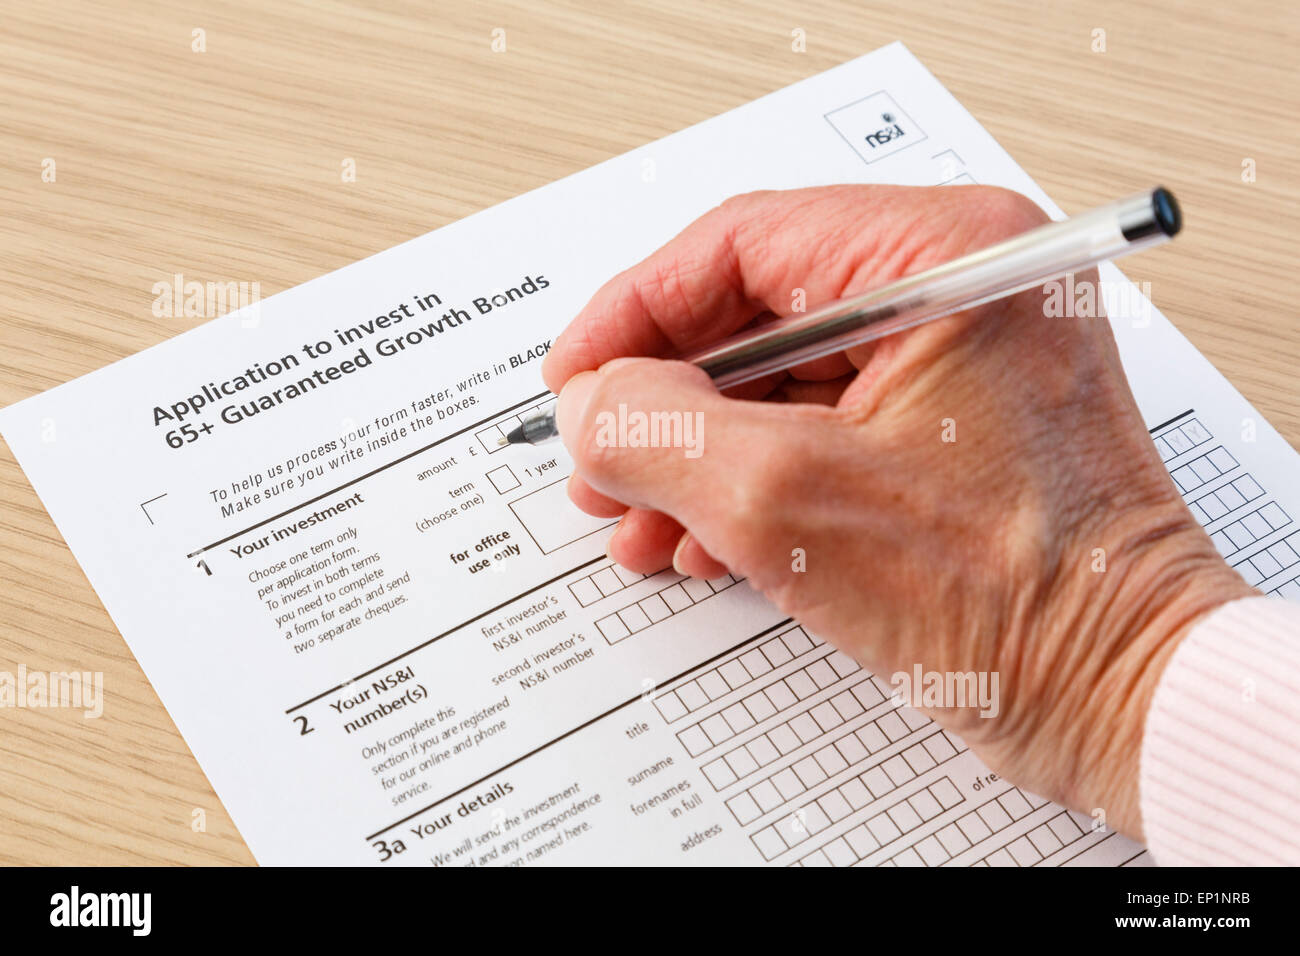 Elderly senior pensioner completing an application form to buy investments in 65+ Guaranteed Growth Bonds. England UK Britain Stock Photo